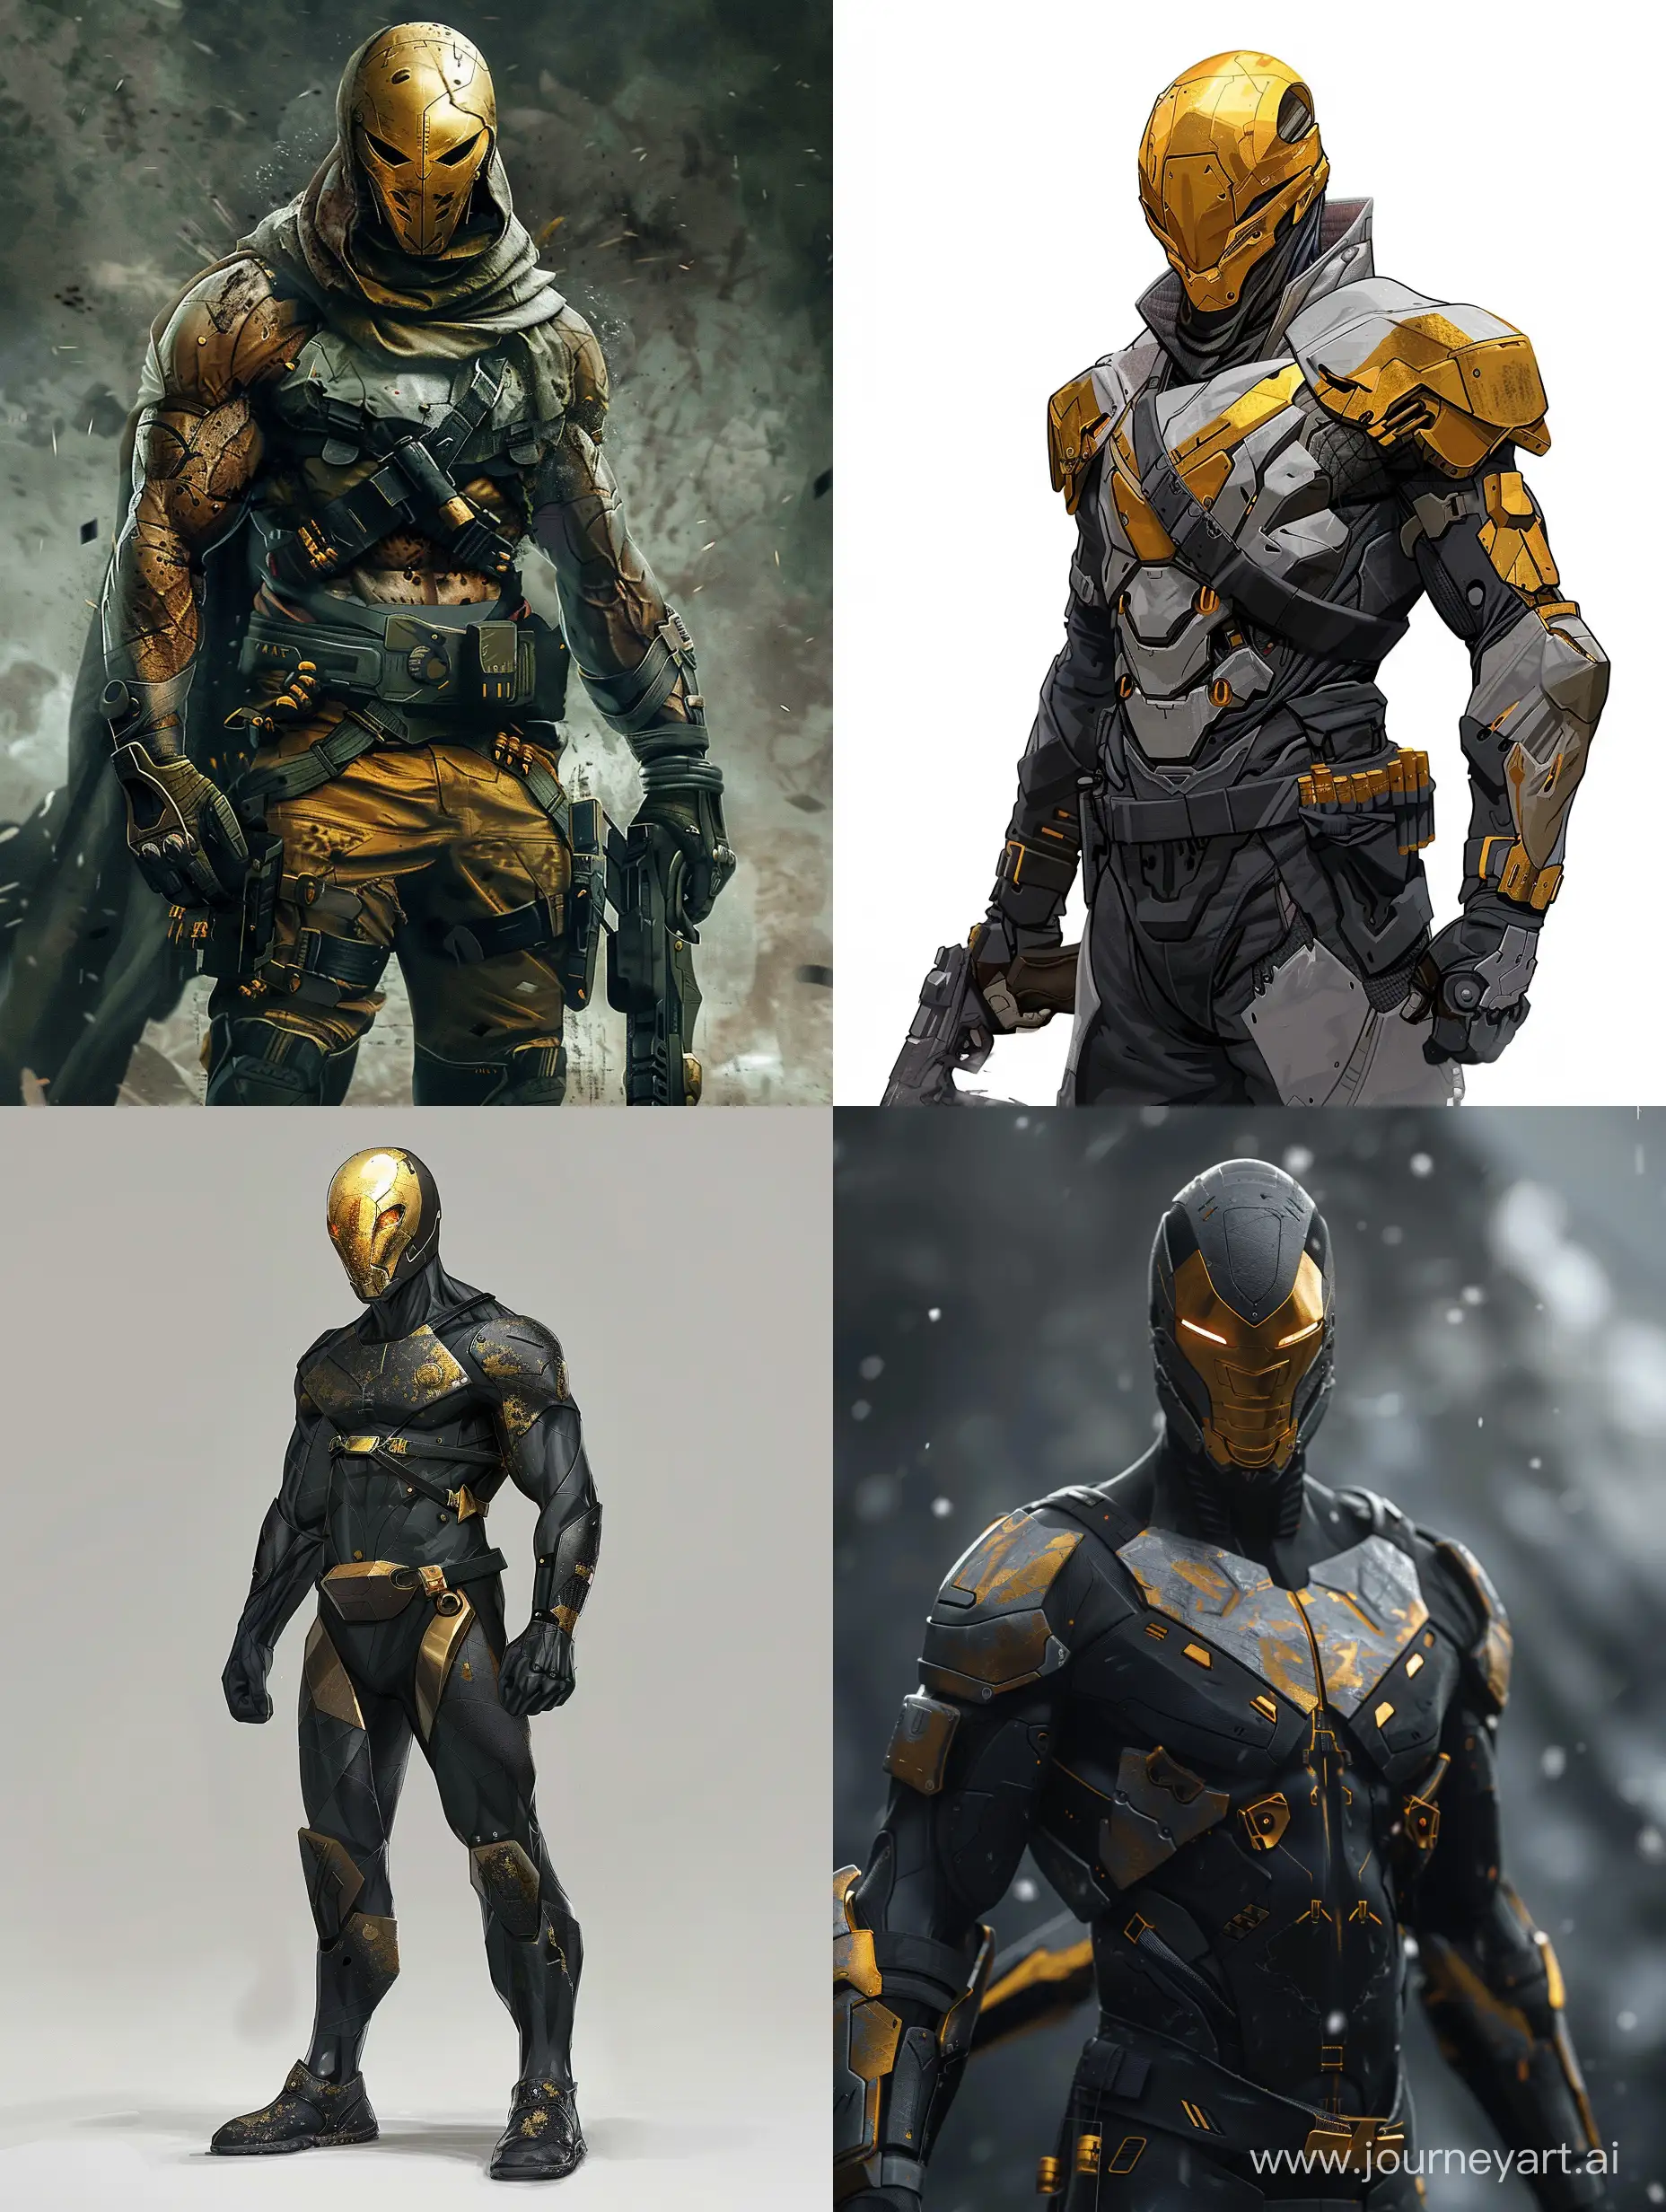 Epic-SciFi-Male-Hunter-with-Gold-Mask-in-Insane-Detail